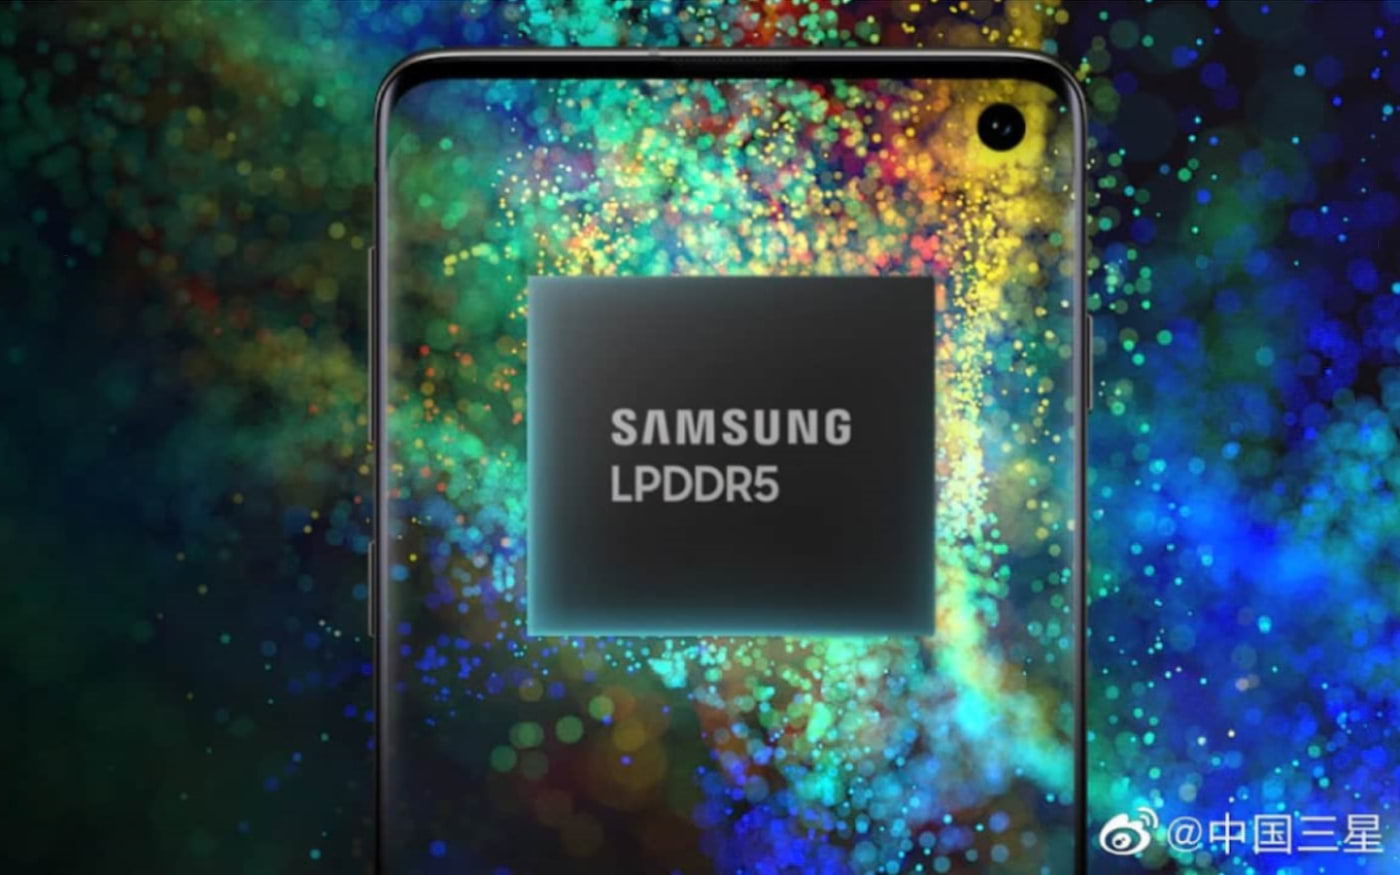 Samsung announces the launch of its LPDDR5 memory for high-end smartphones